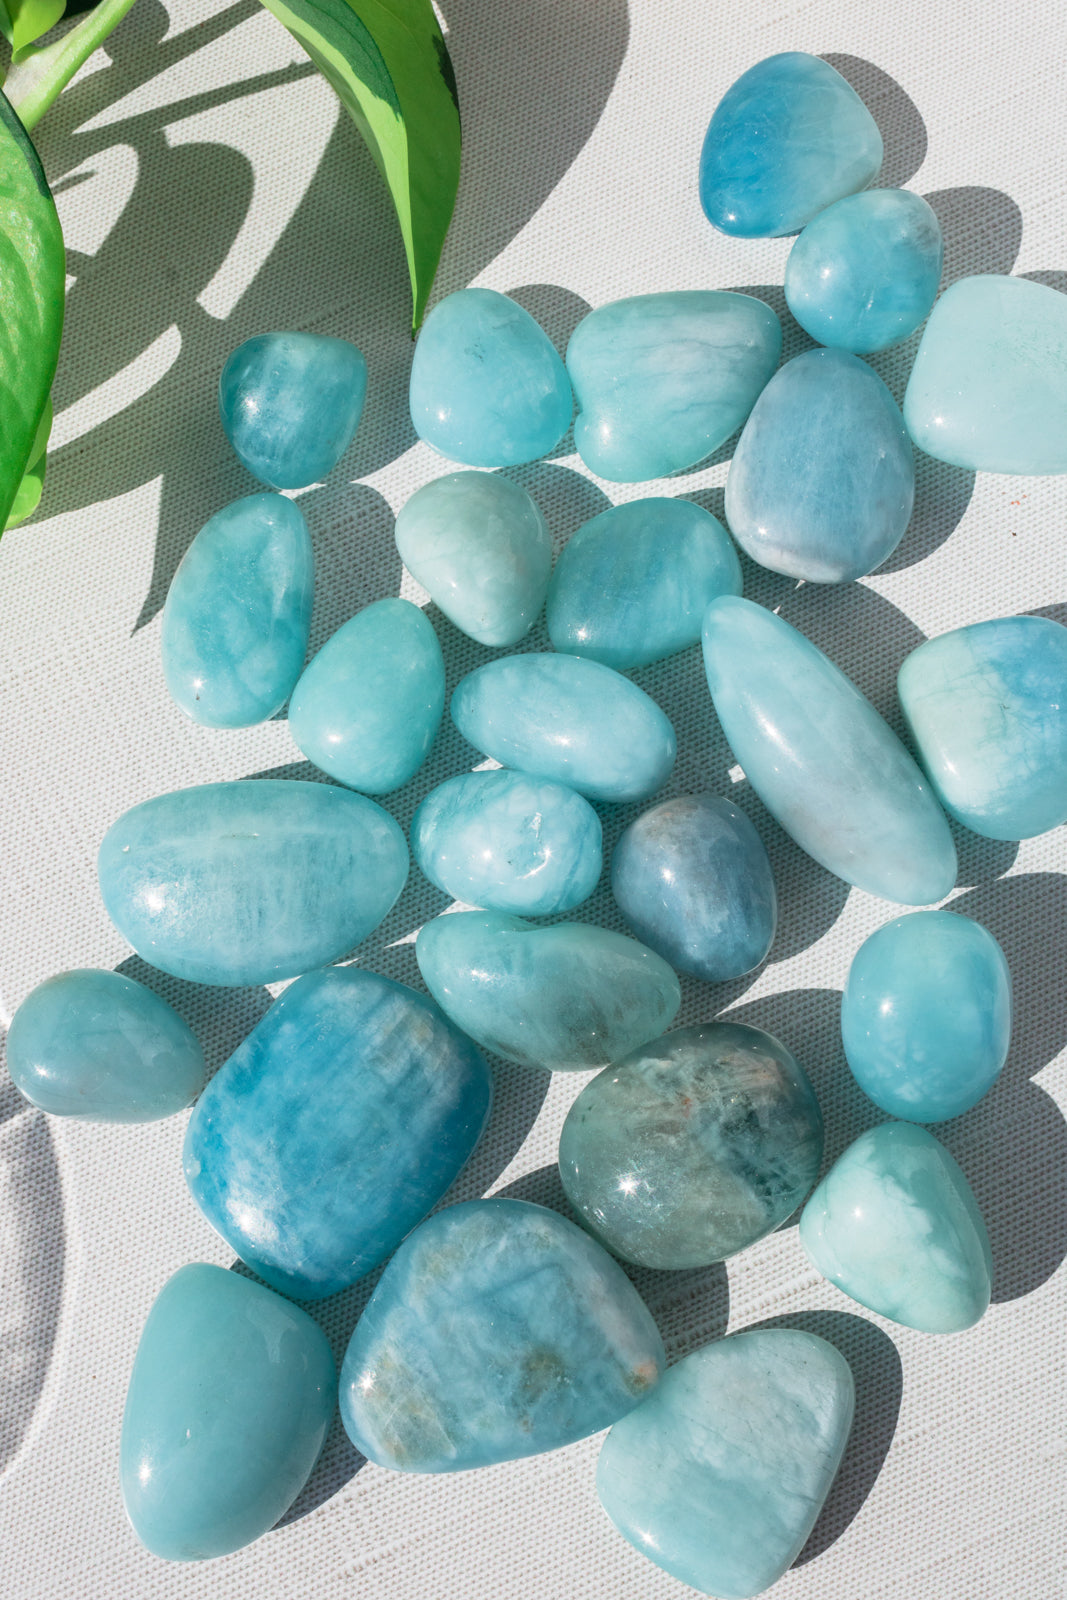 Load image into Gallery viewer, Aquamarine Tumbled Stone
